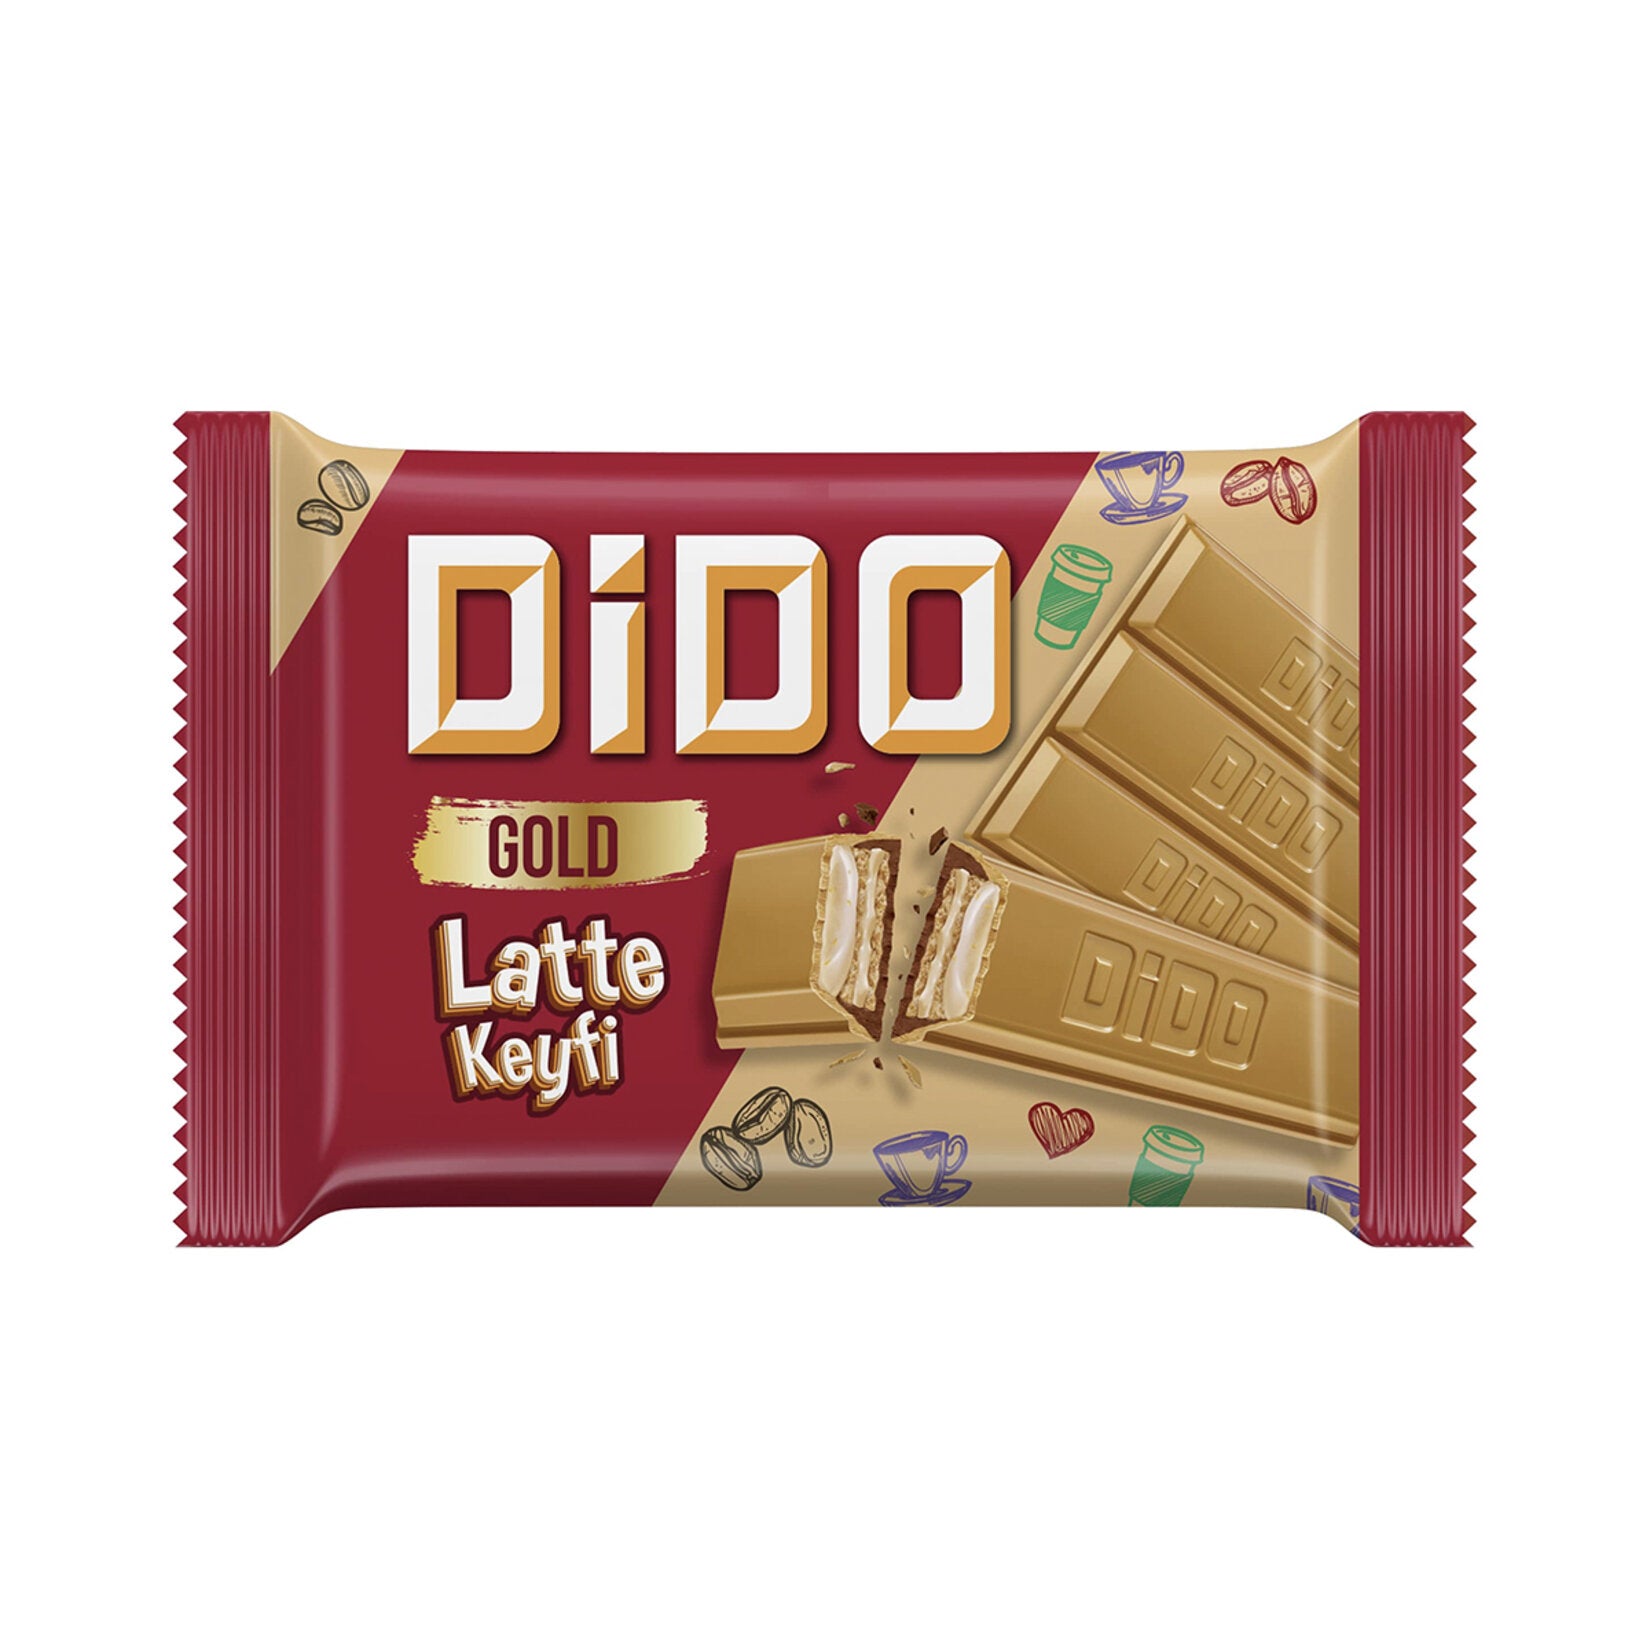 Ülker Dido Gold Chocolate Wafer With Milk Jam Taste 36g - Shop Wafers at   - Best Brands and Products - Free Worldwide Shipping Over $150